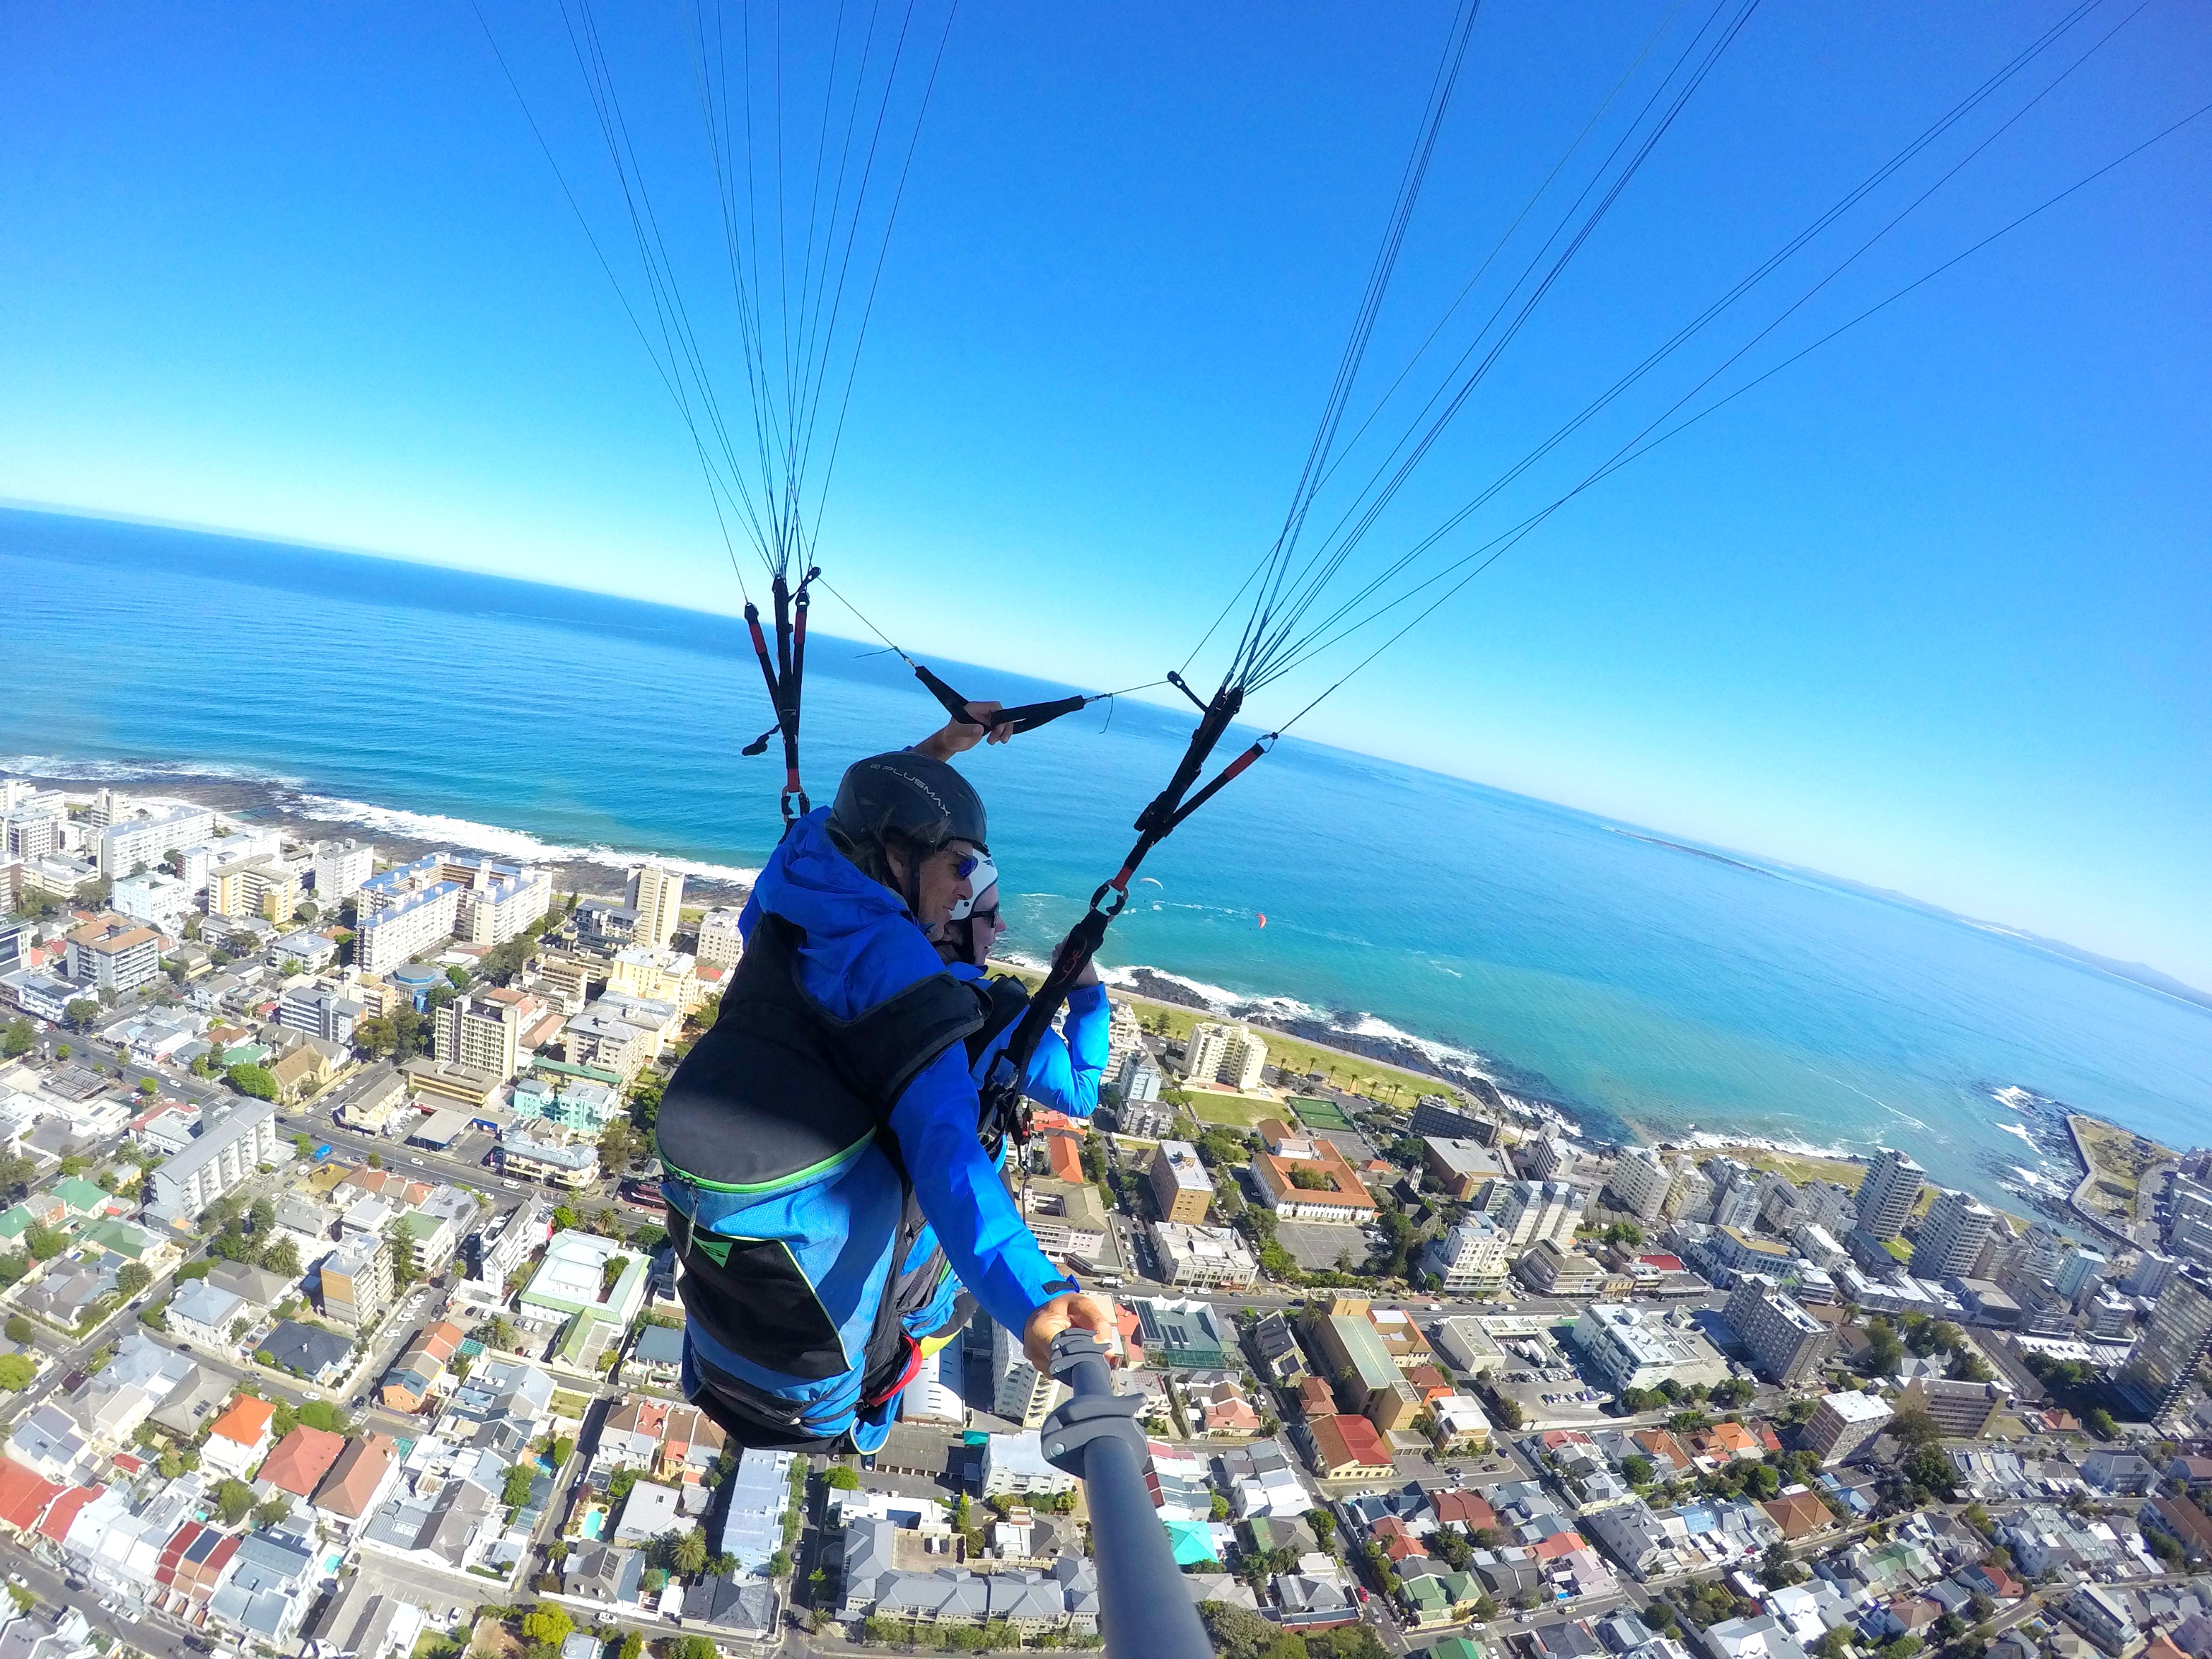 Paragliding with Cape Town Tandem Paragliding